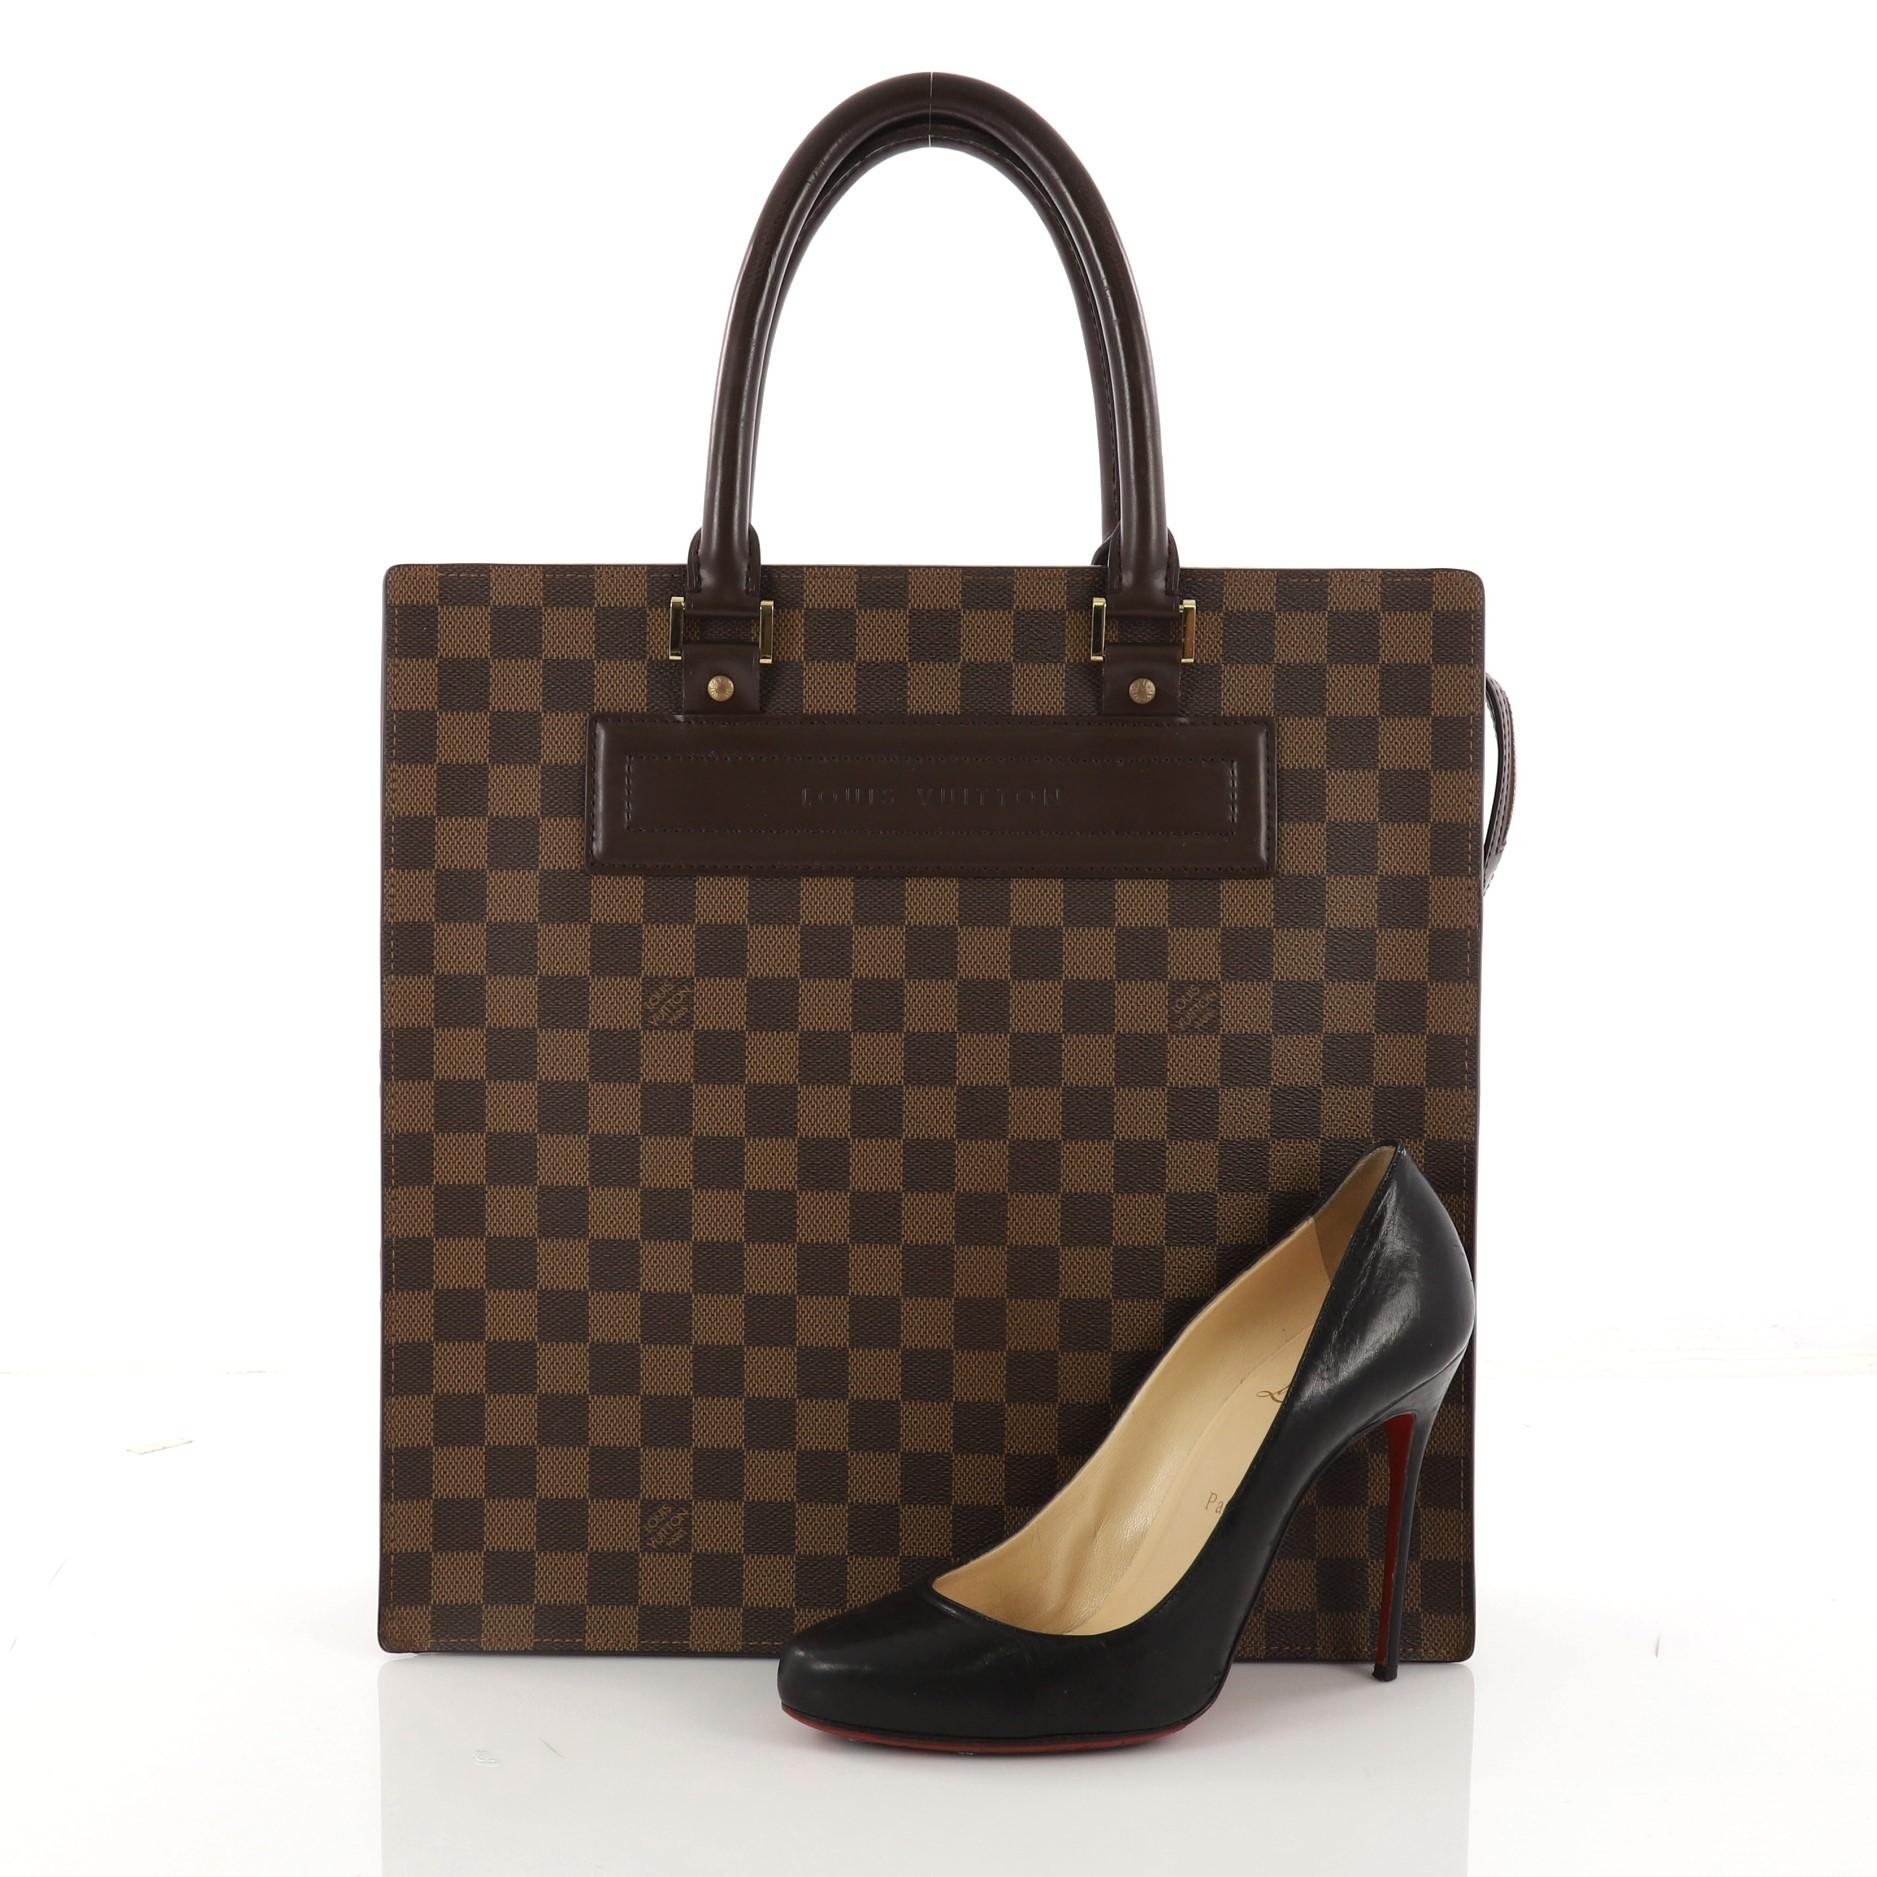 This authentic Louis Vuitton Venice Sac Plat Handbag Damier GM is a compact and structured design perfect for your work essentials. Crafted in the iconic damier ebene coated canvas, this simple bag features dual-rolled leather handles, gusseted